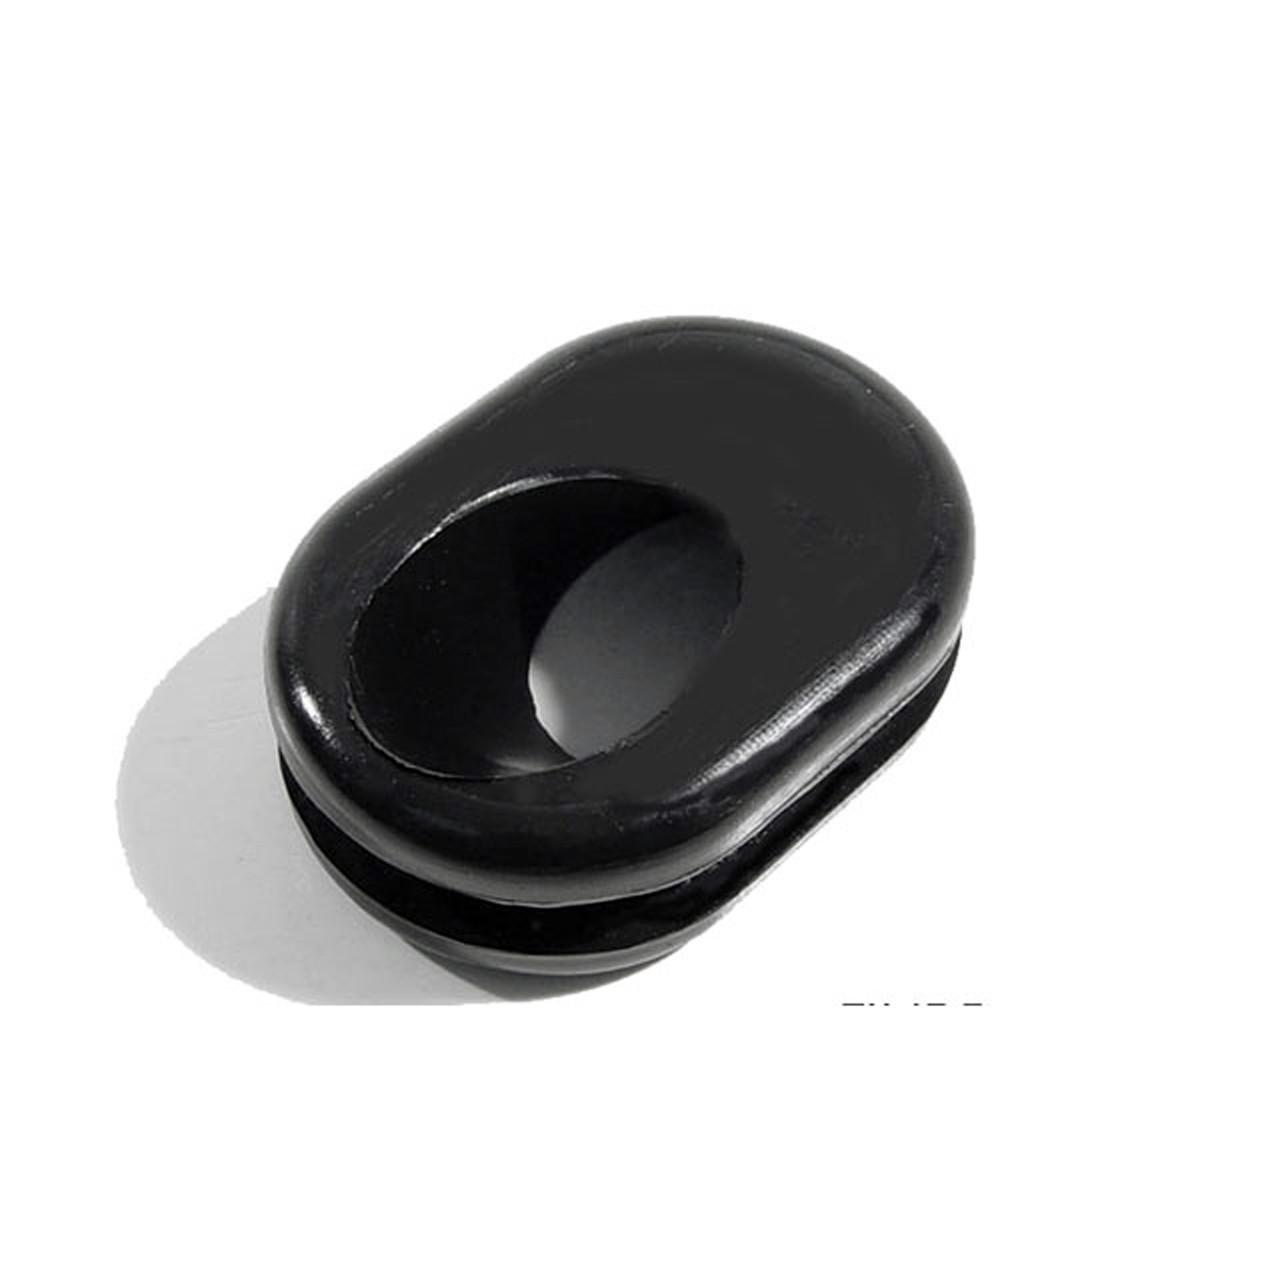 Rubber Bumper Body Grommet and Hole Plug Kit